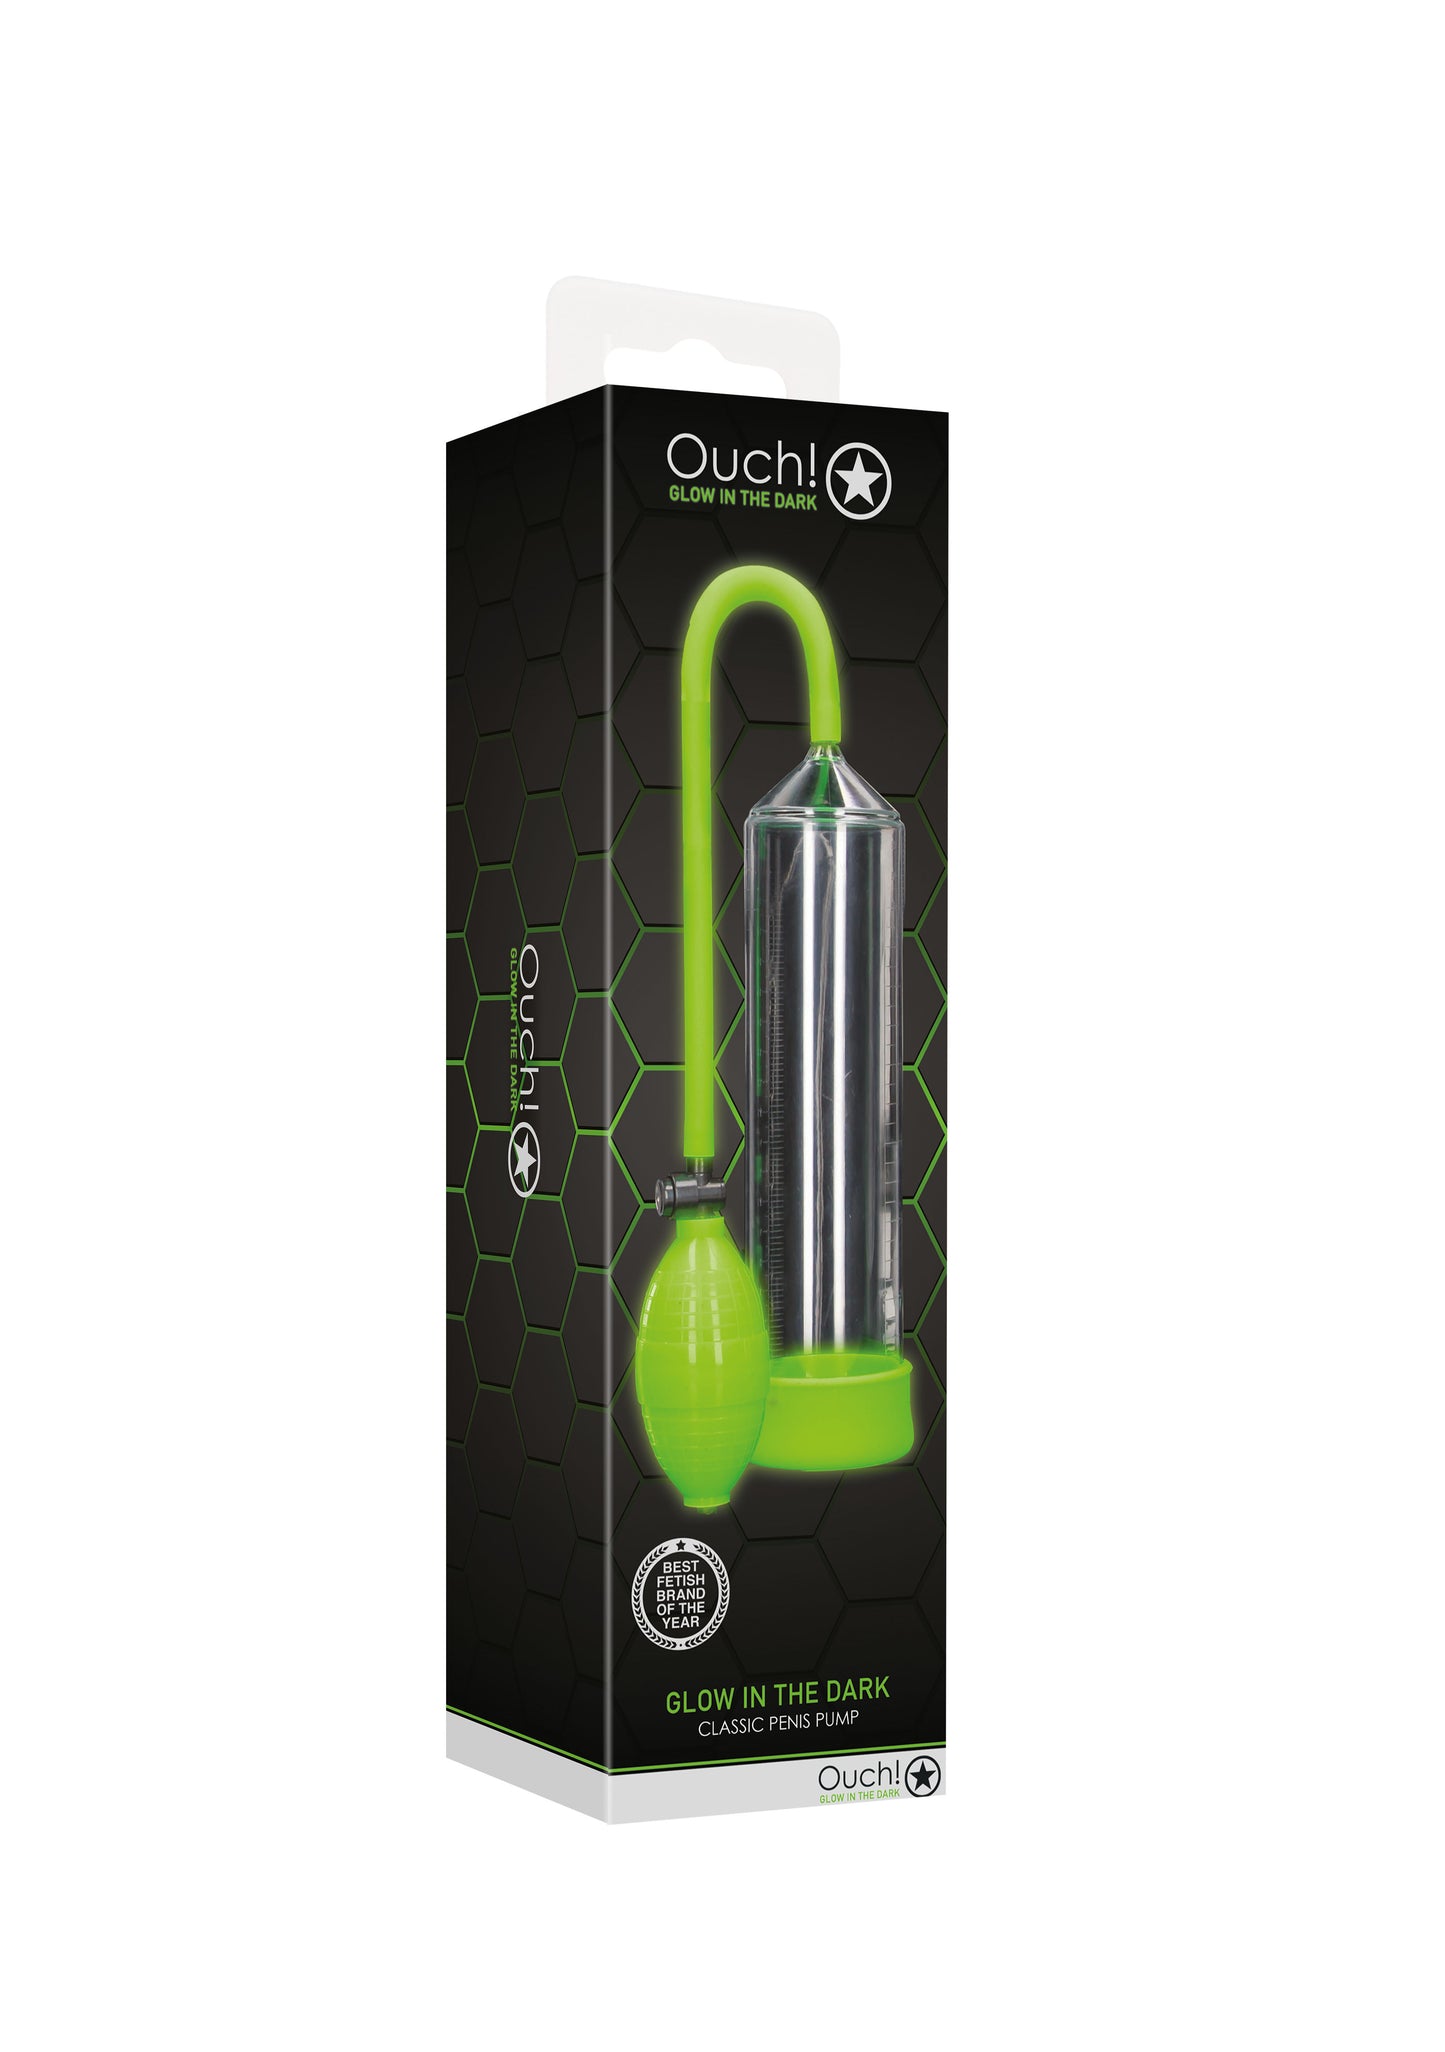 Ouch Classic Penis Pump Glow in the Dark